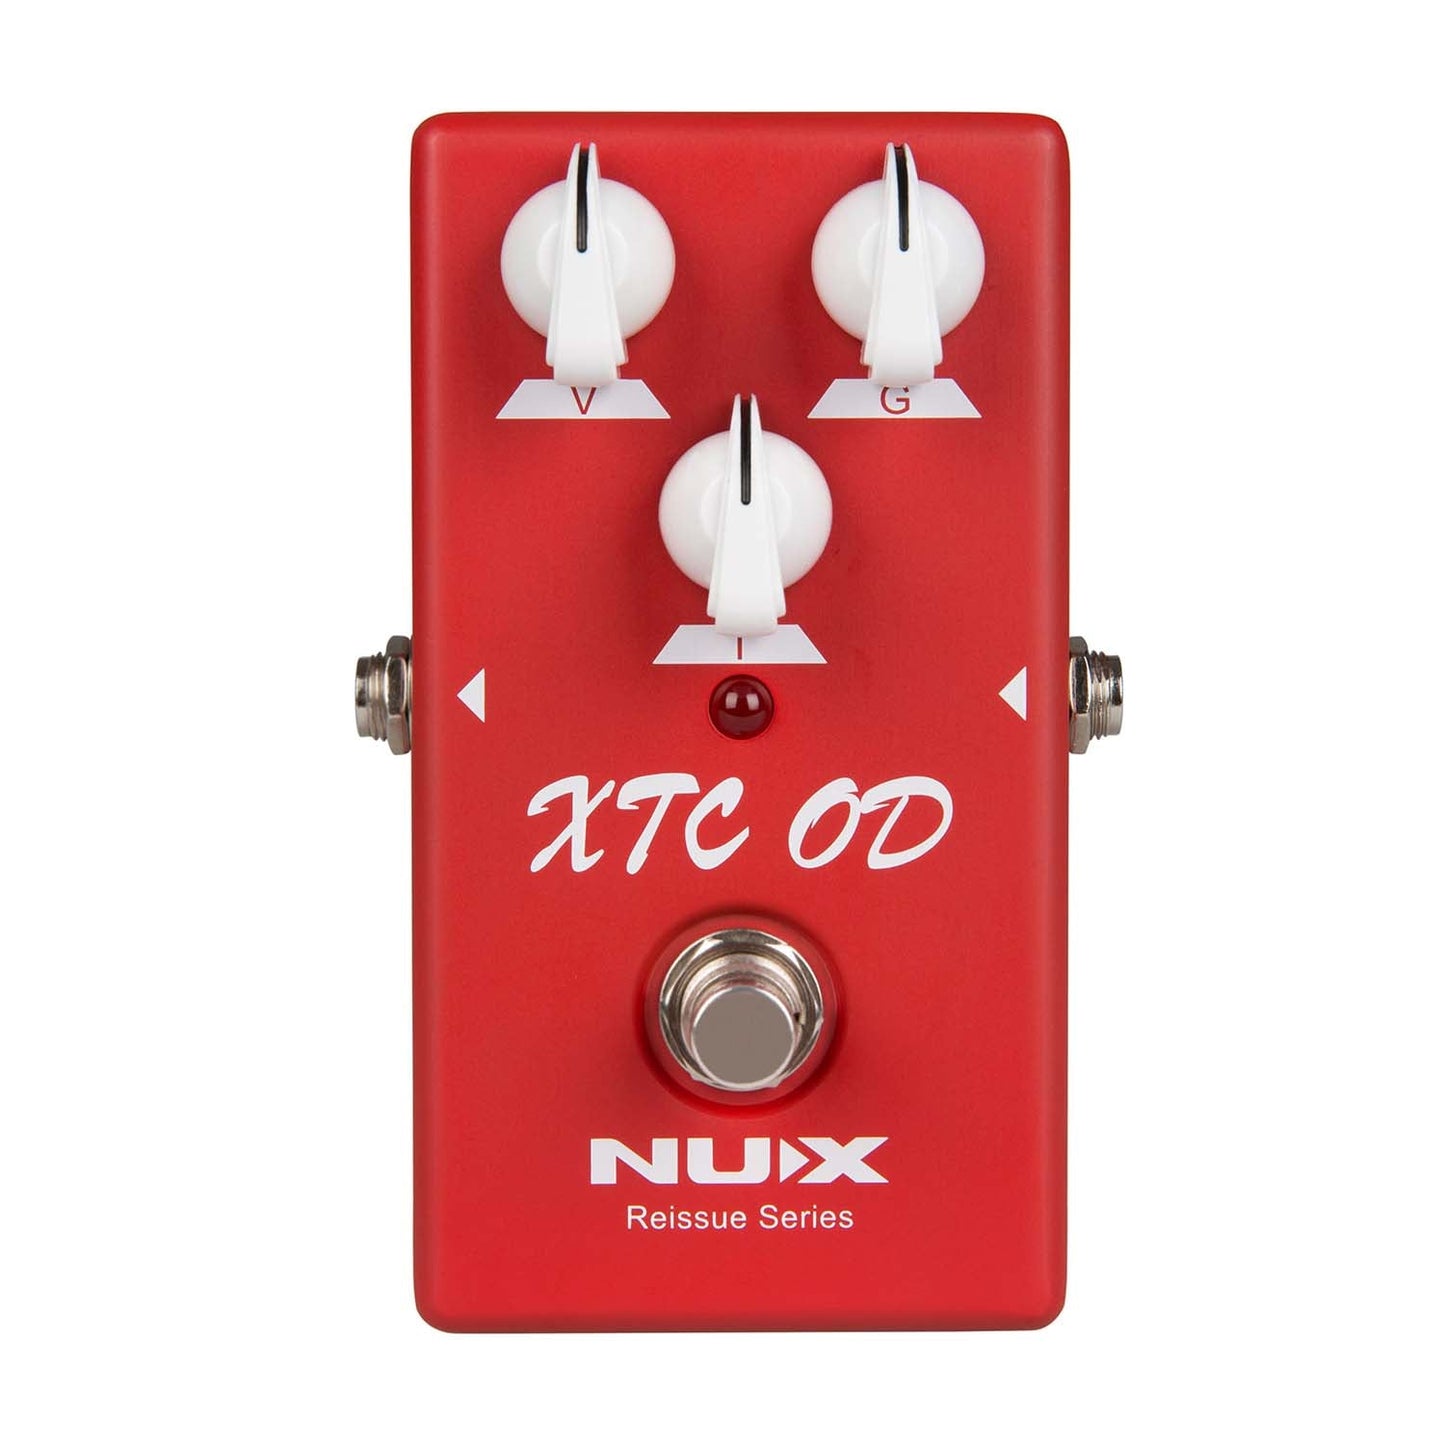 NUX XTC OD Reissue Series Effect pedal